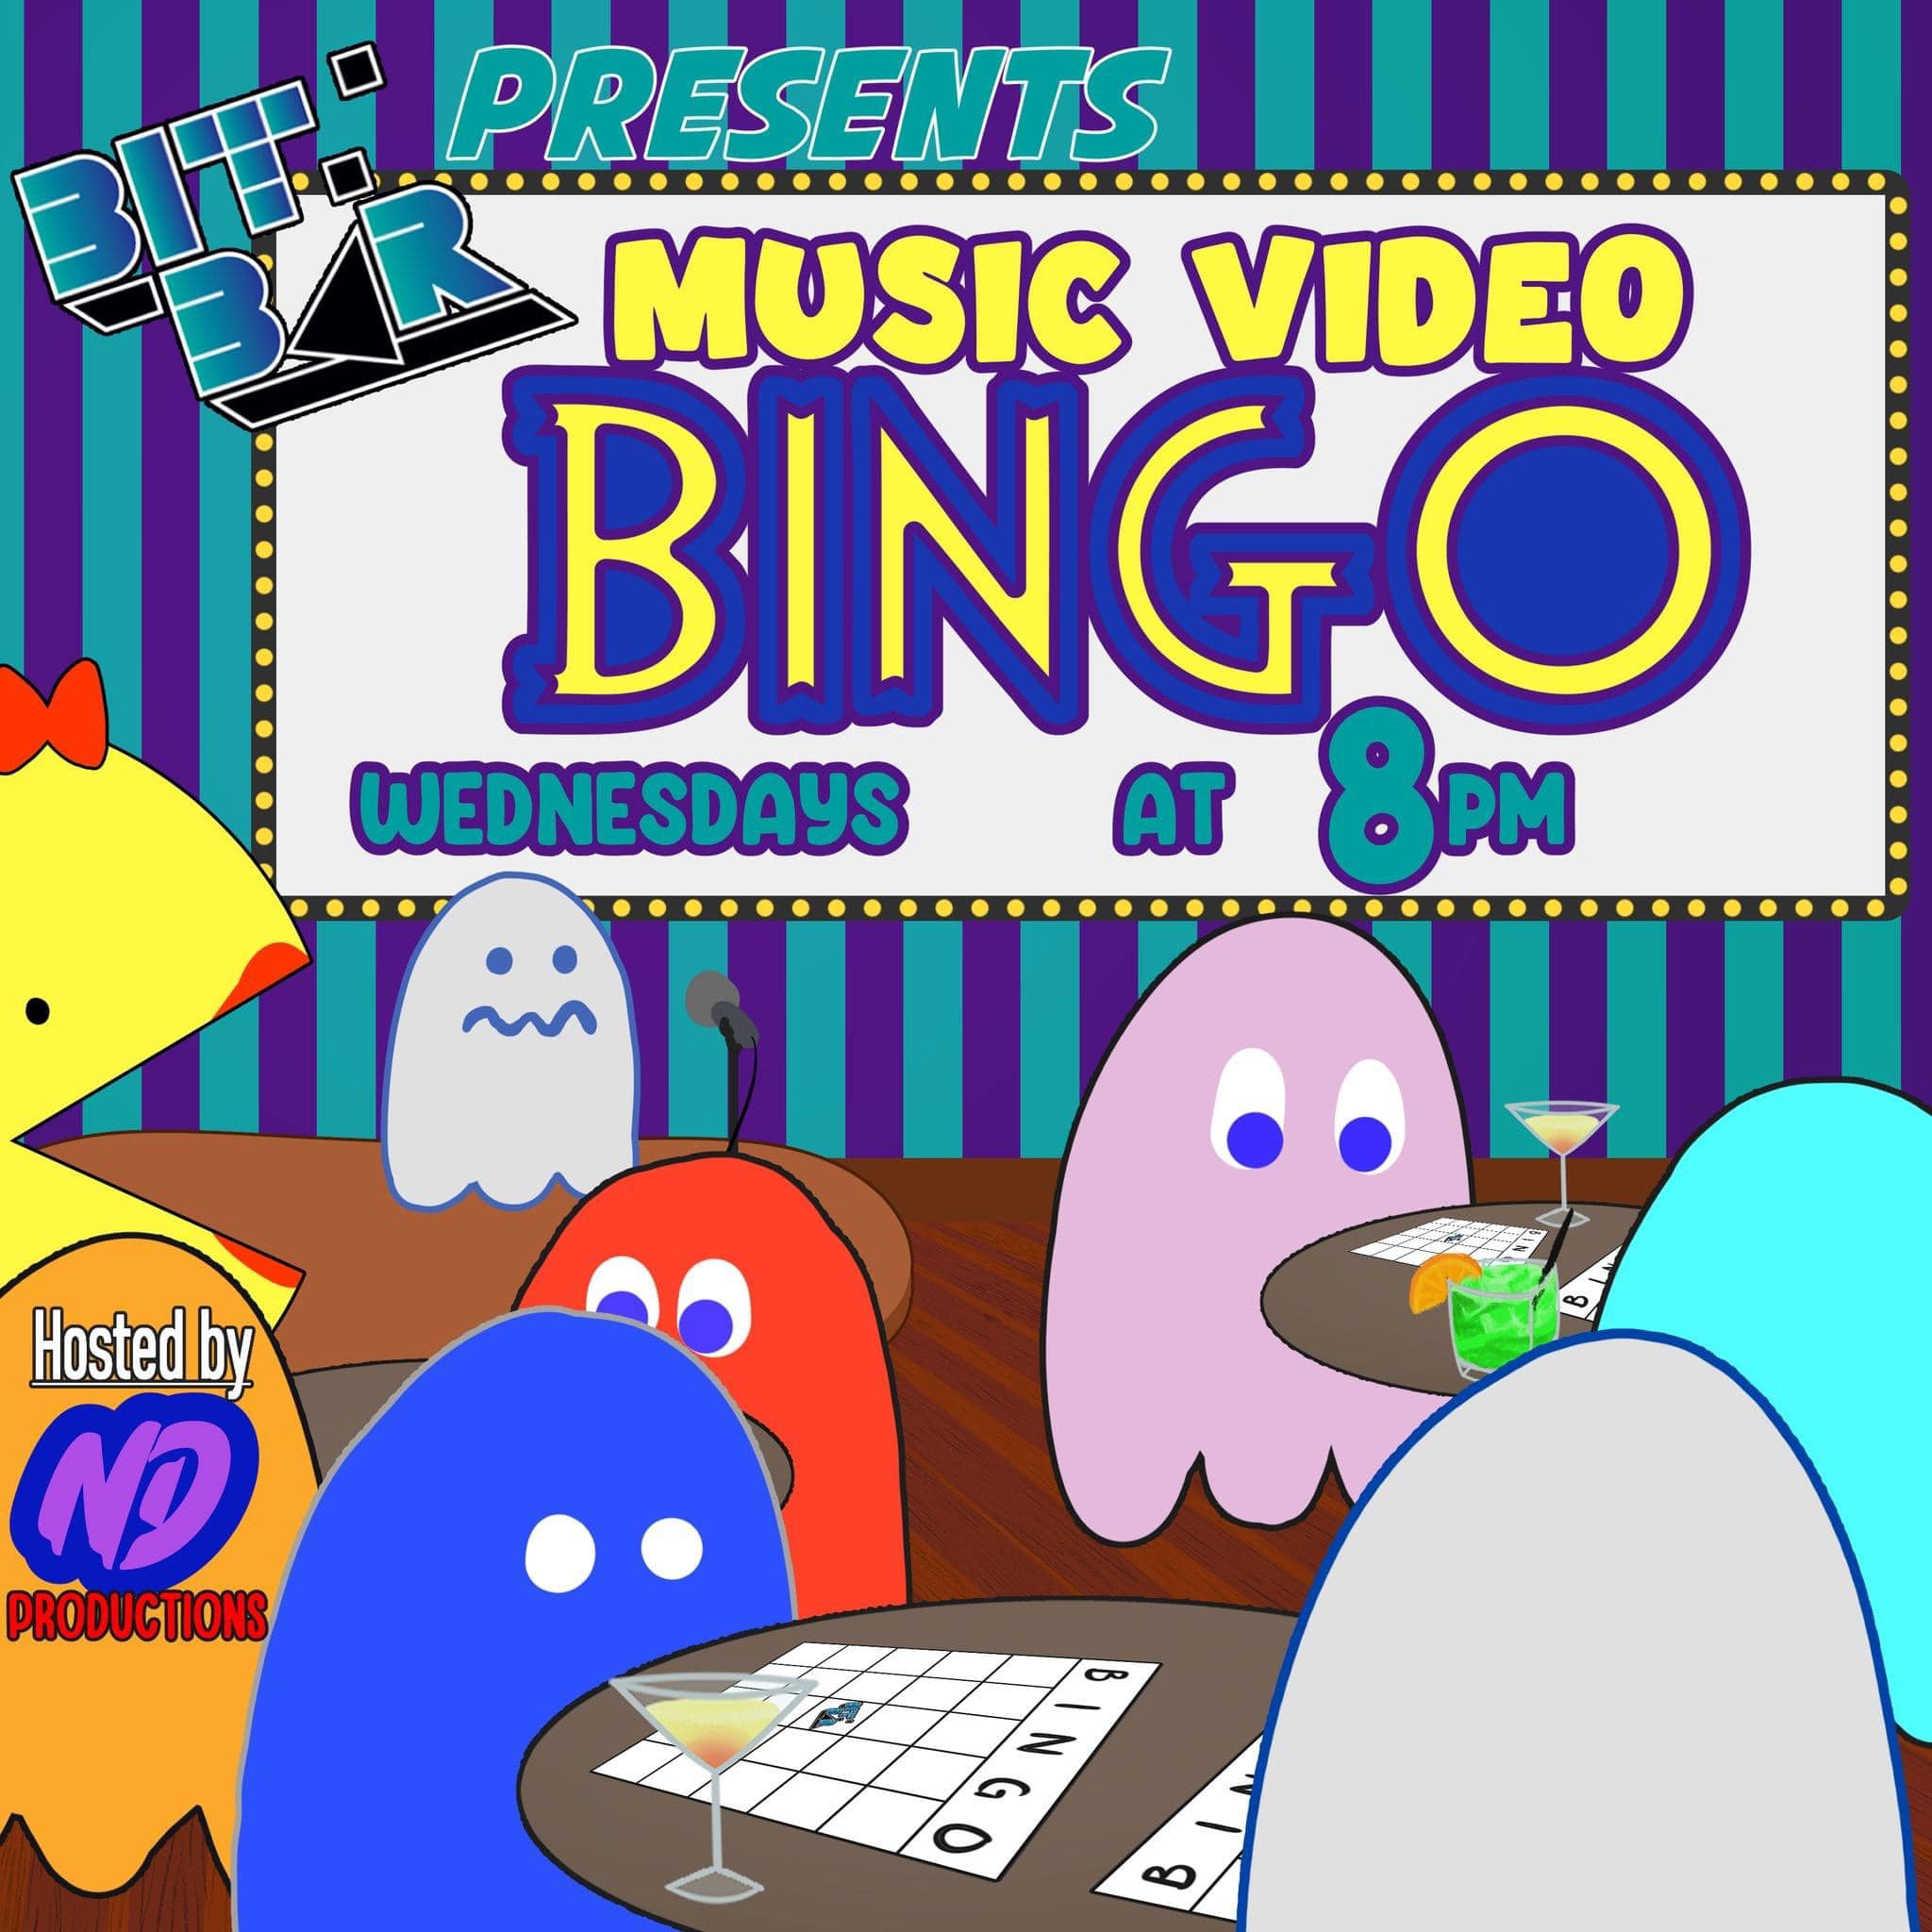 A poster for a music video bingo.